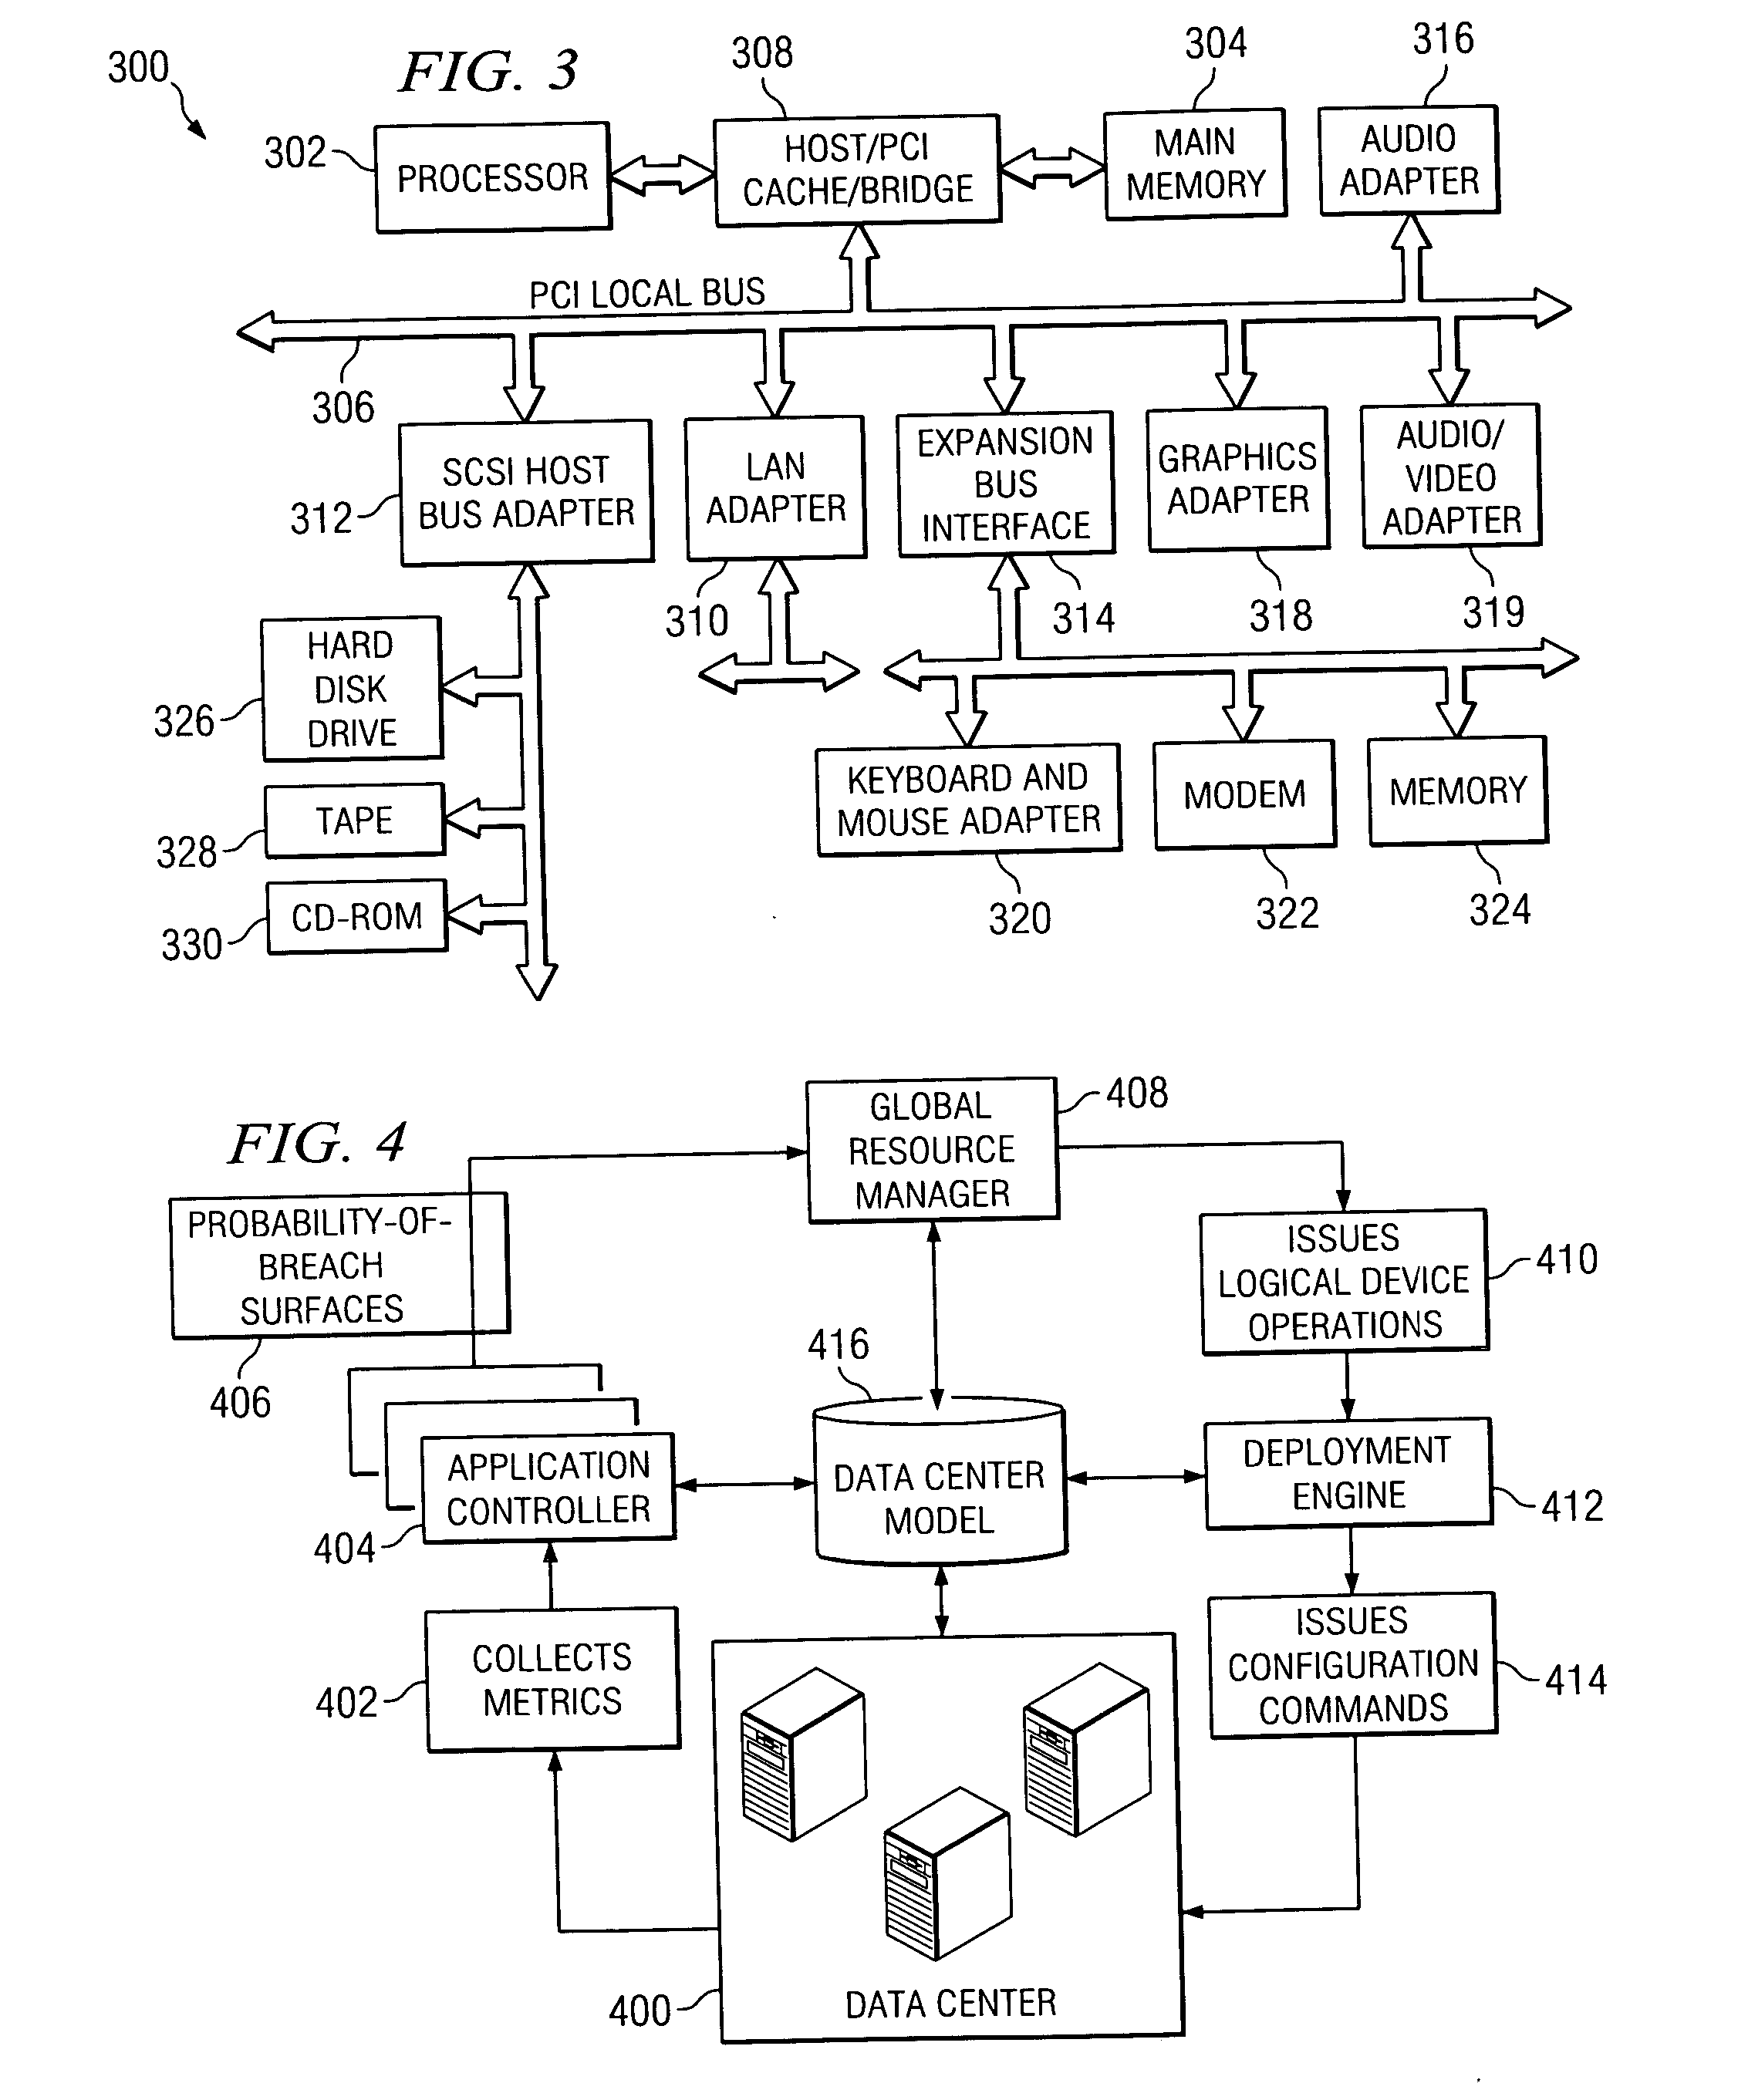 Maintaining service reliability in a data center using a service level objective provisioning mechanism